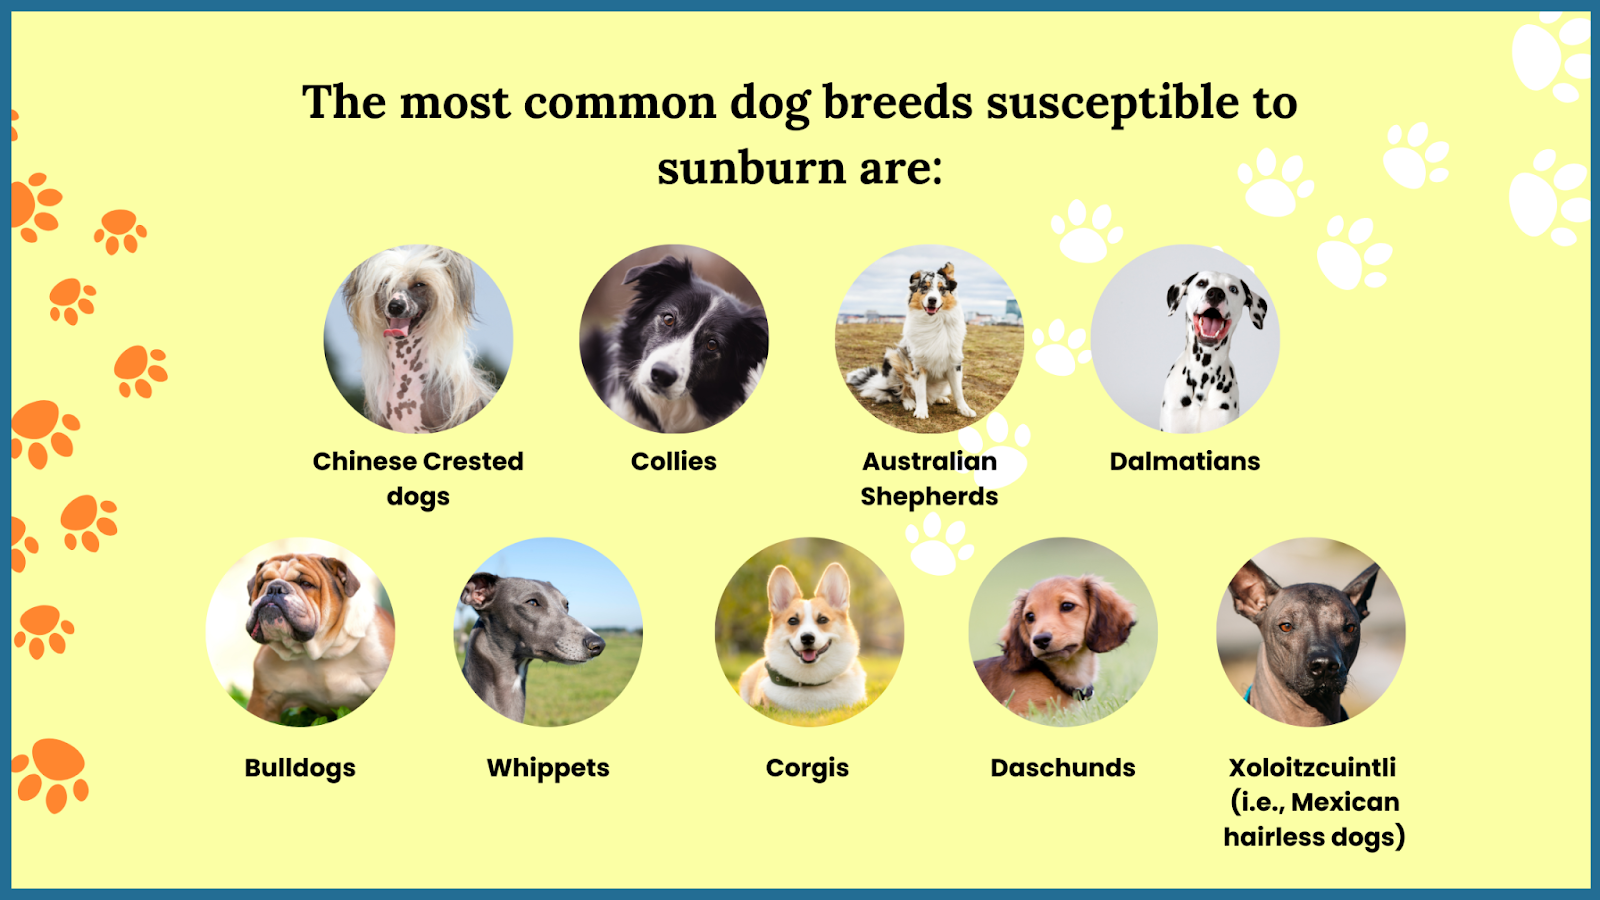 The most common dog breeds susceptible to sunburn are: Collies, Dalmatians, Bulldogs, Whippets, and Corgis. 